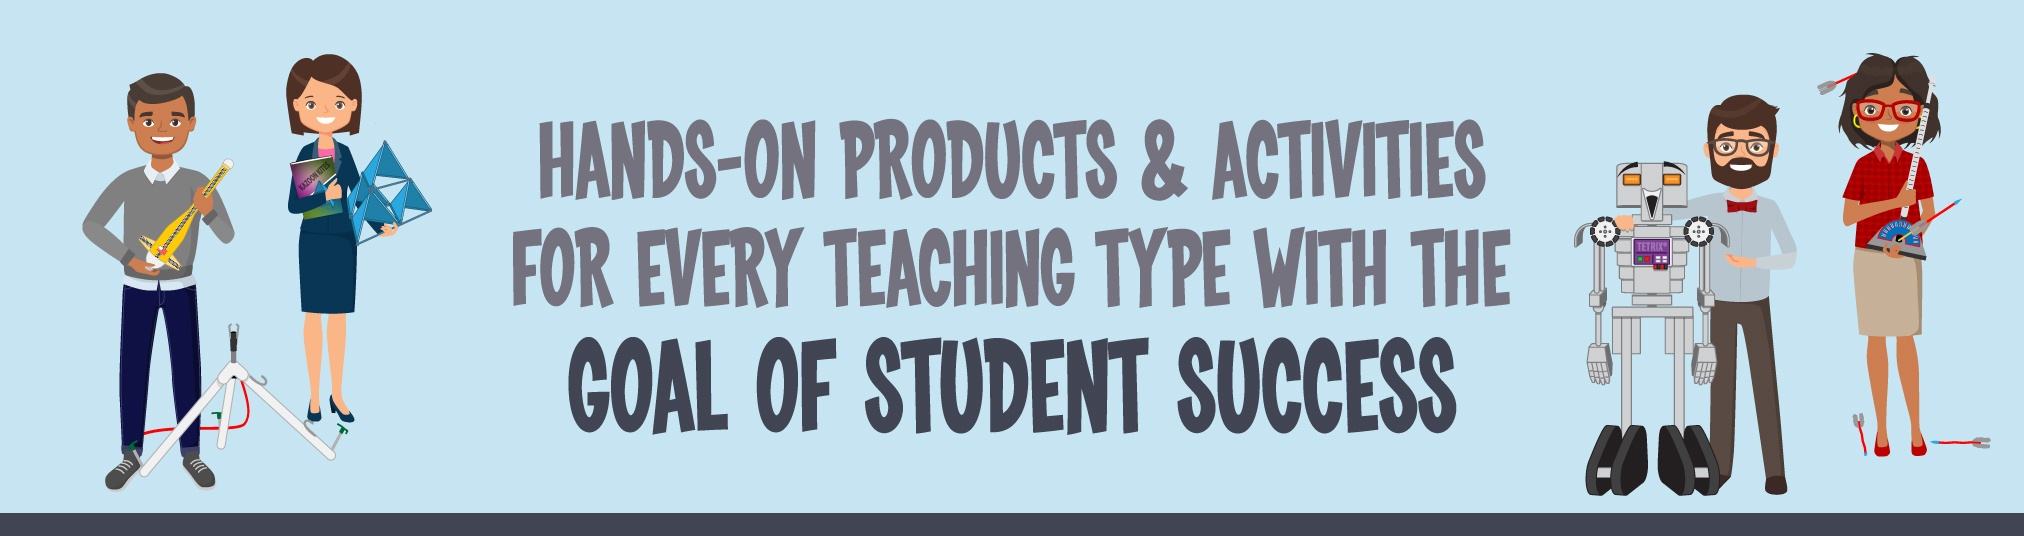 Hands-on products & activities for every teaching type with the goal of student success